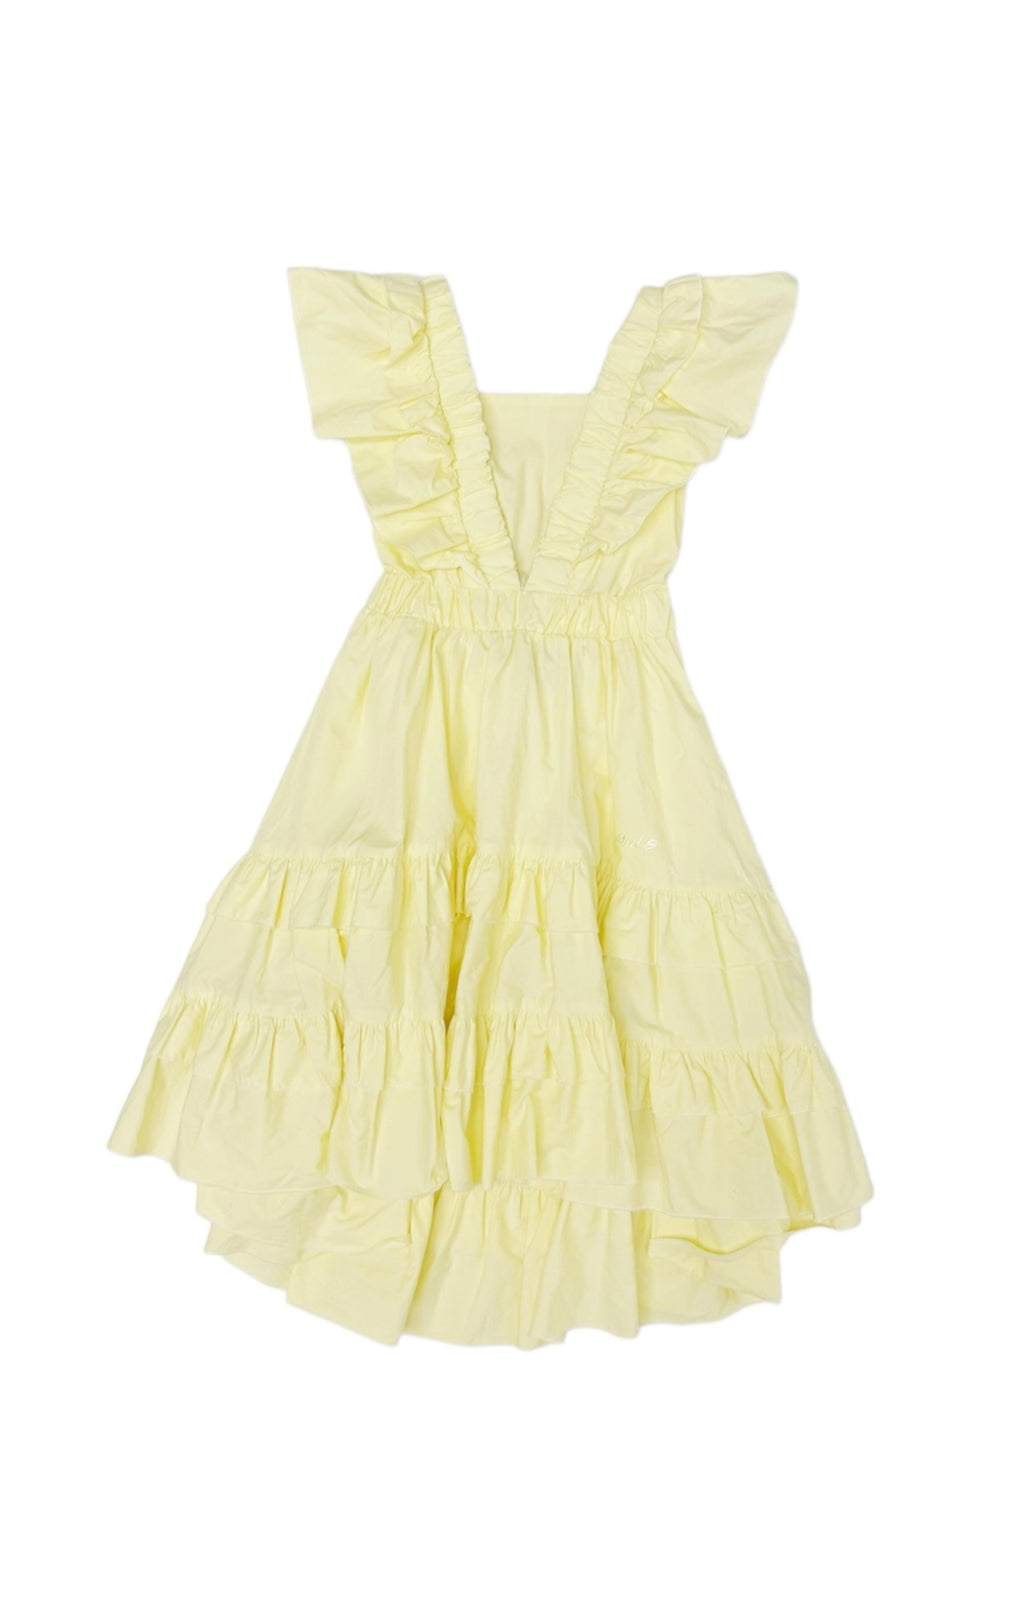 MONNALISA (NEW) with tags Dress Size: 6 Years